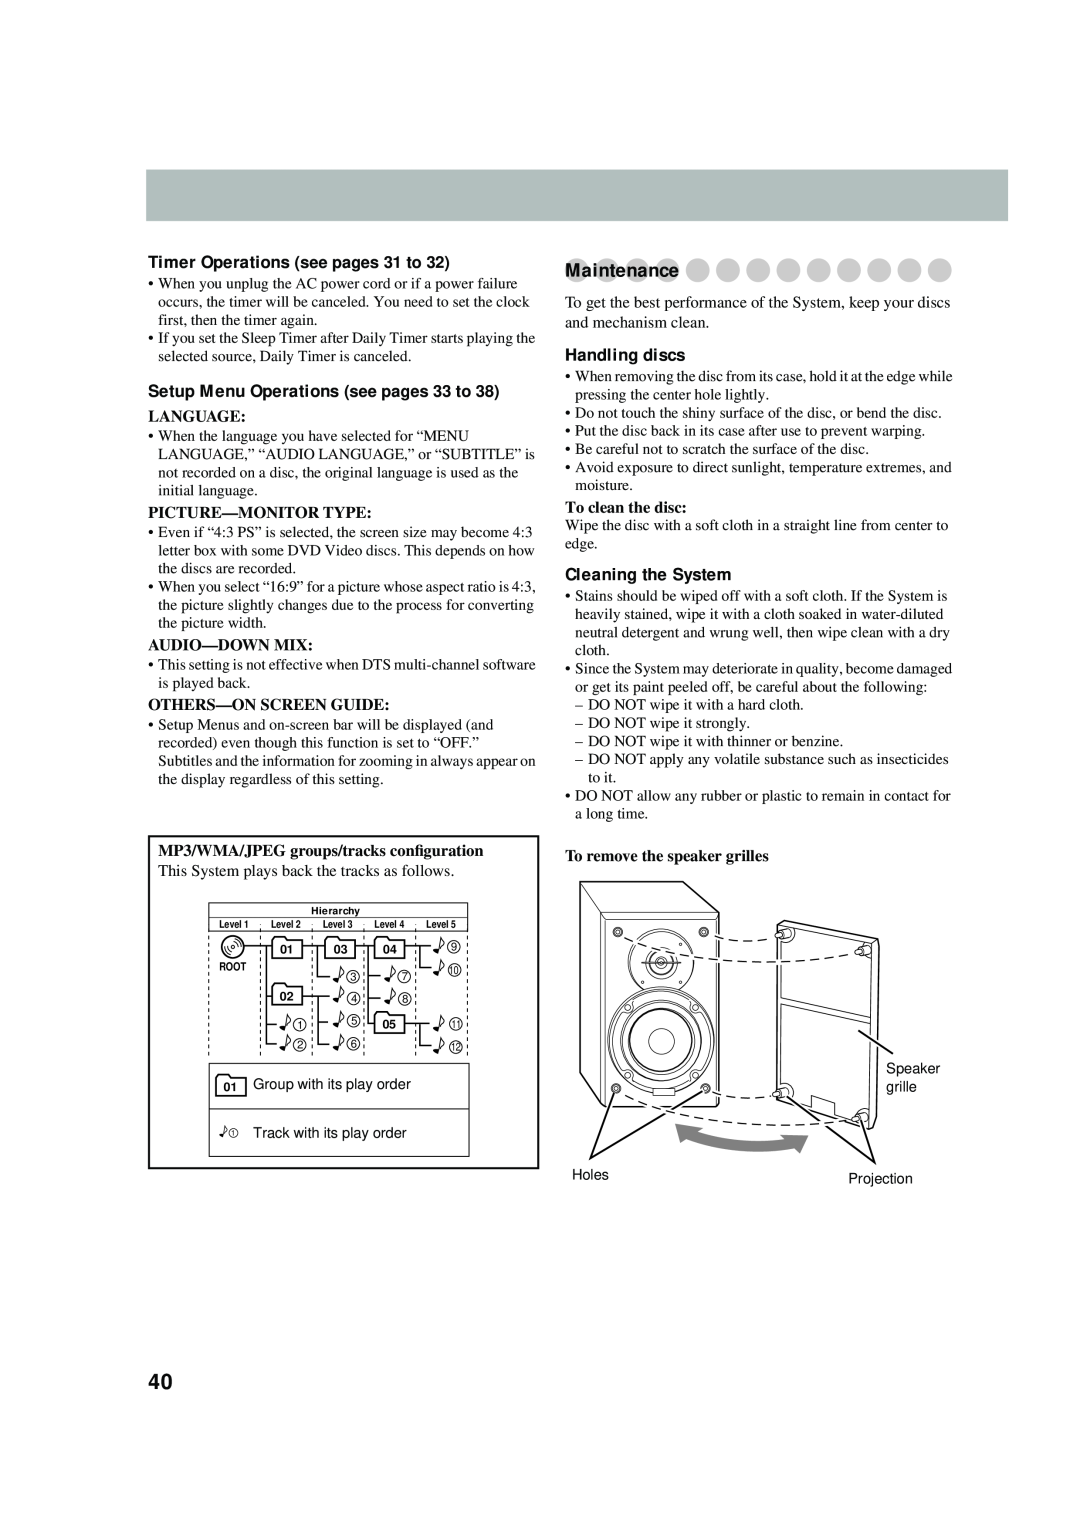 JVC UX-P550 manual Maintenance, Setup Menu Operations see pages 33 to, Handling discs, Cleaning the System, Language 